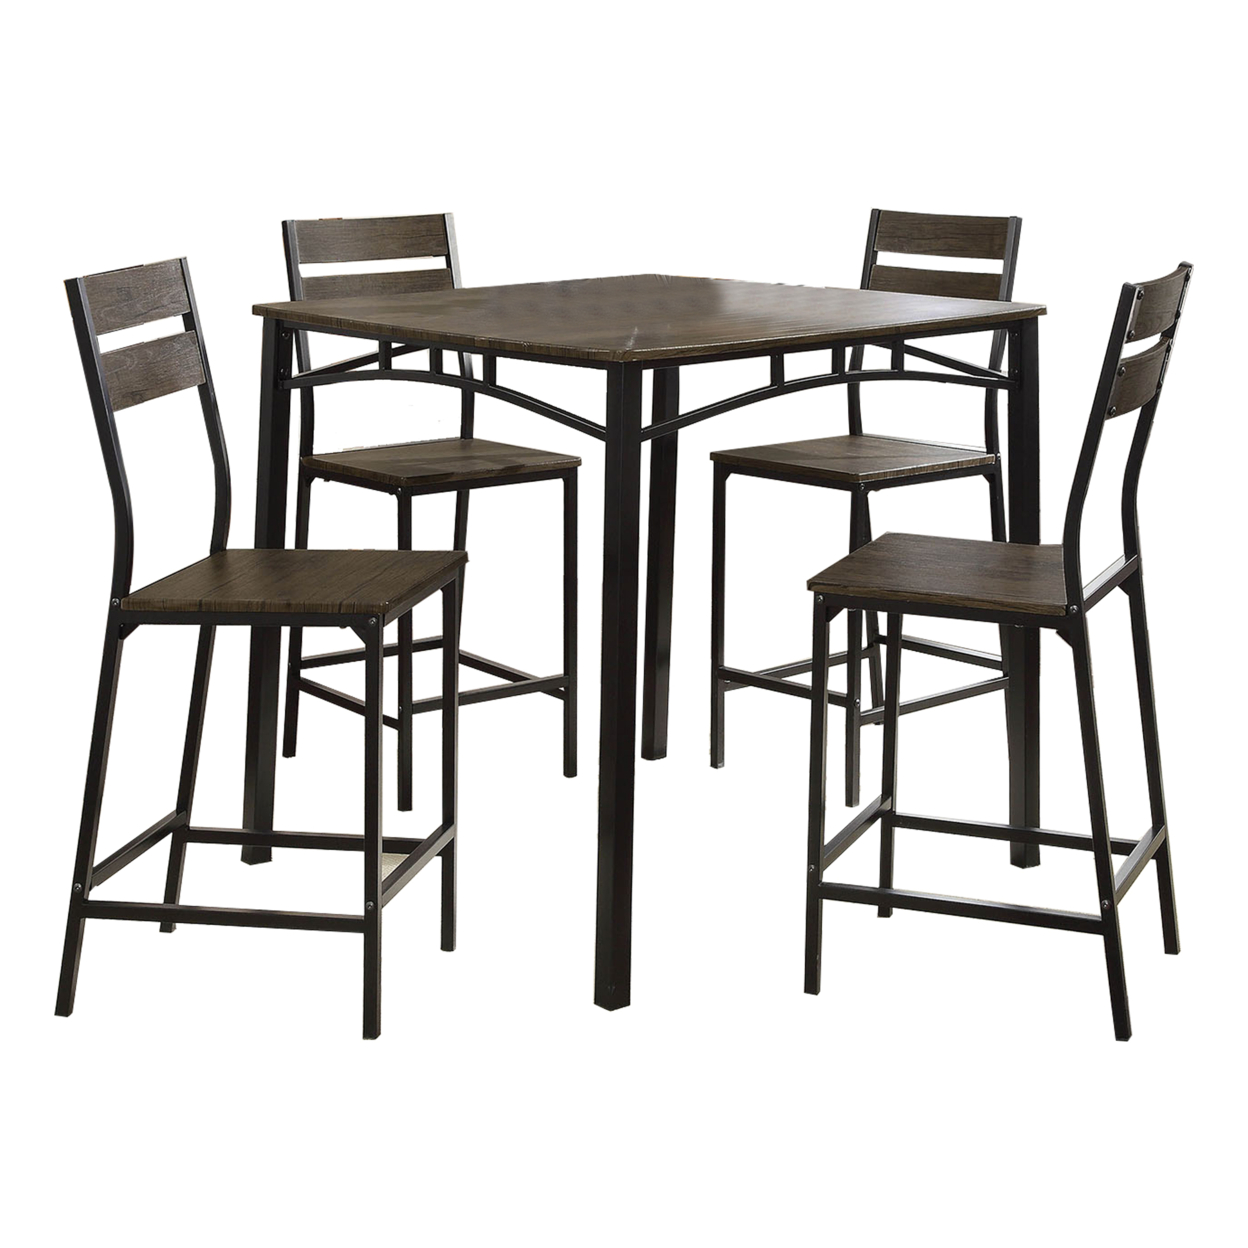 5 Piece Metal And Wood Counter Height Table Set In Antique Brown- Saltoro Sherpi